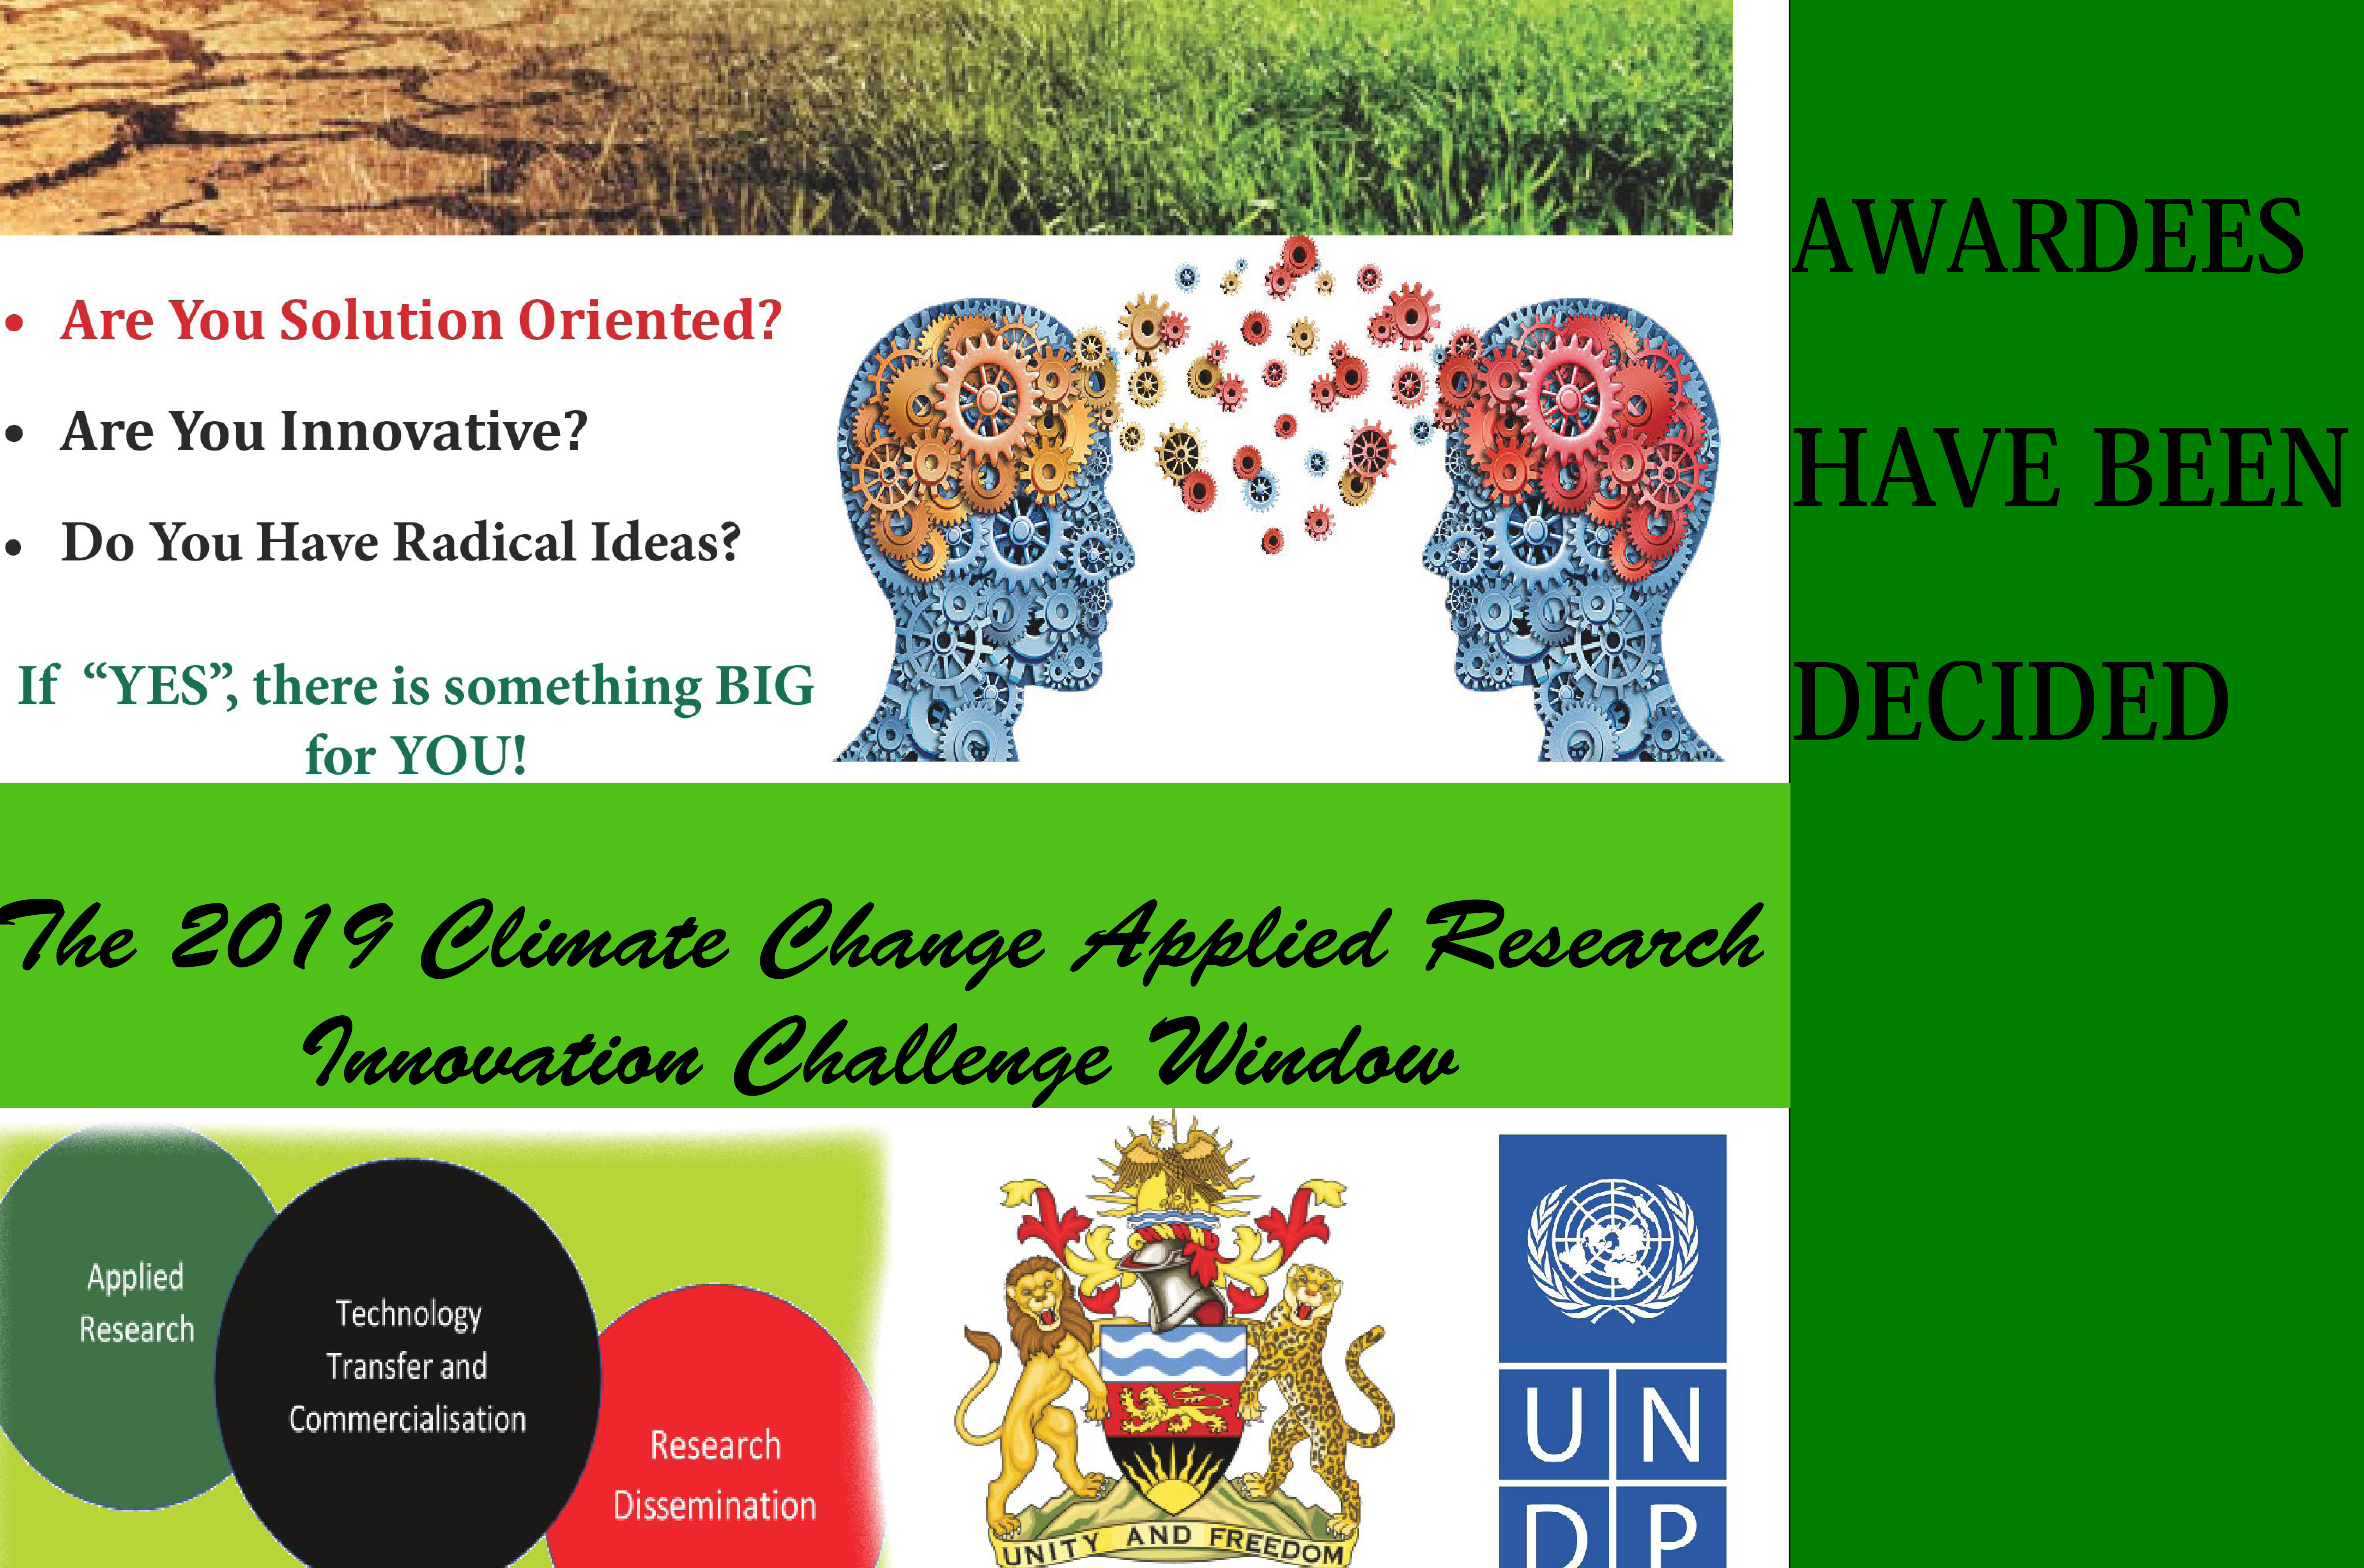 RESULTS OF THE 2019/2020 CLIMATE CHANGE APPLIED RESEARCH INNOVATION CHALLENGE ARE OUT